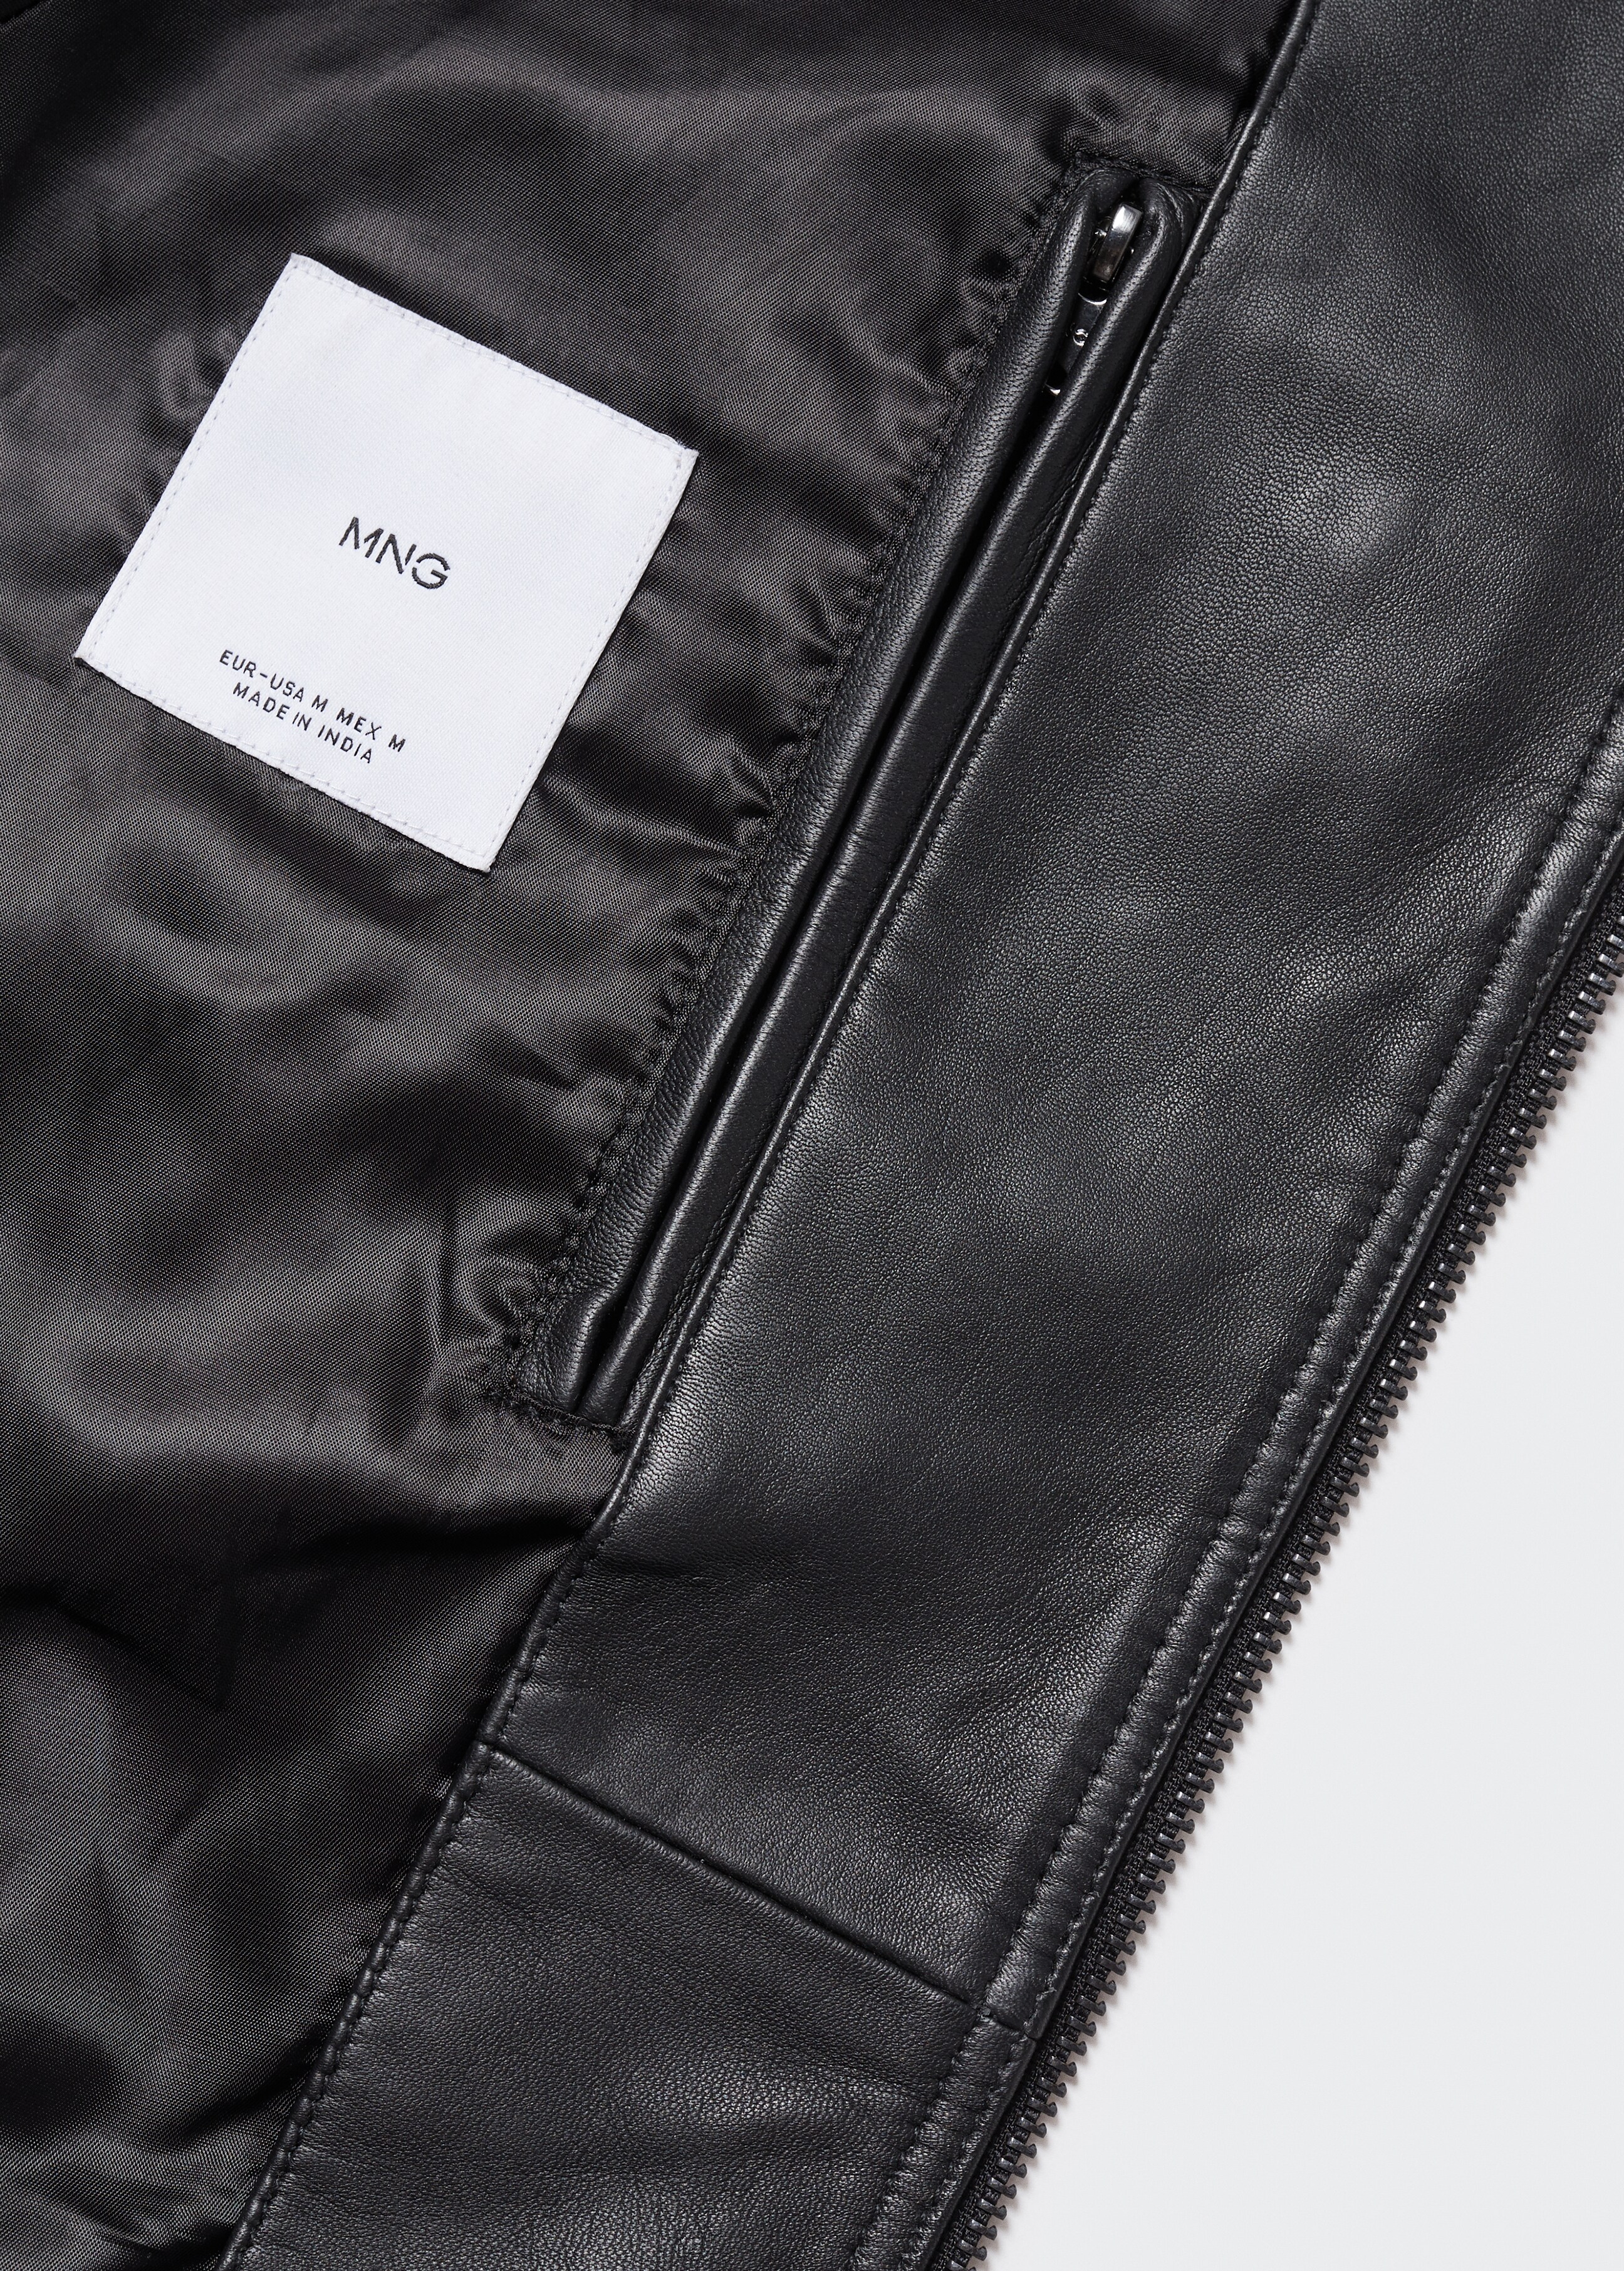 Leather biker jacket - Details of the article 8